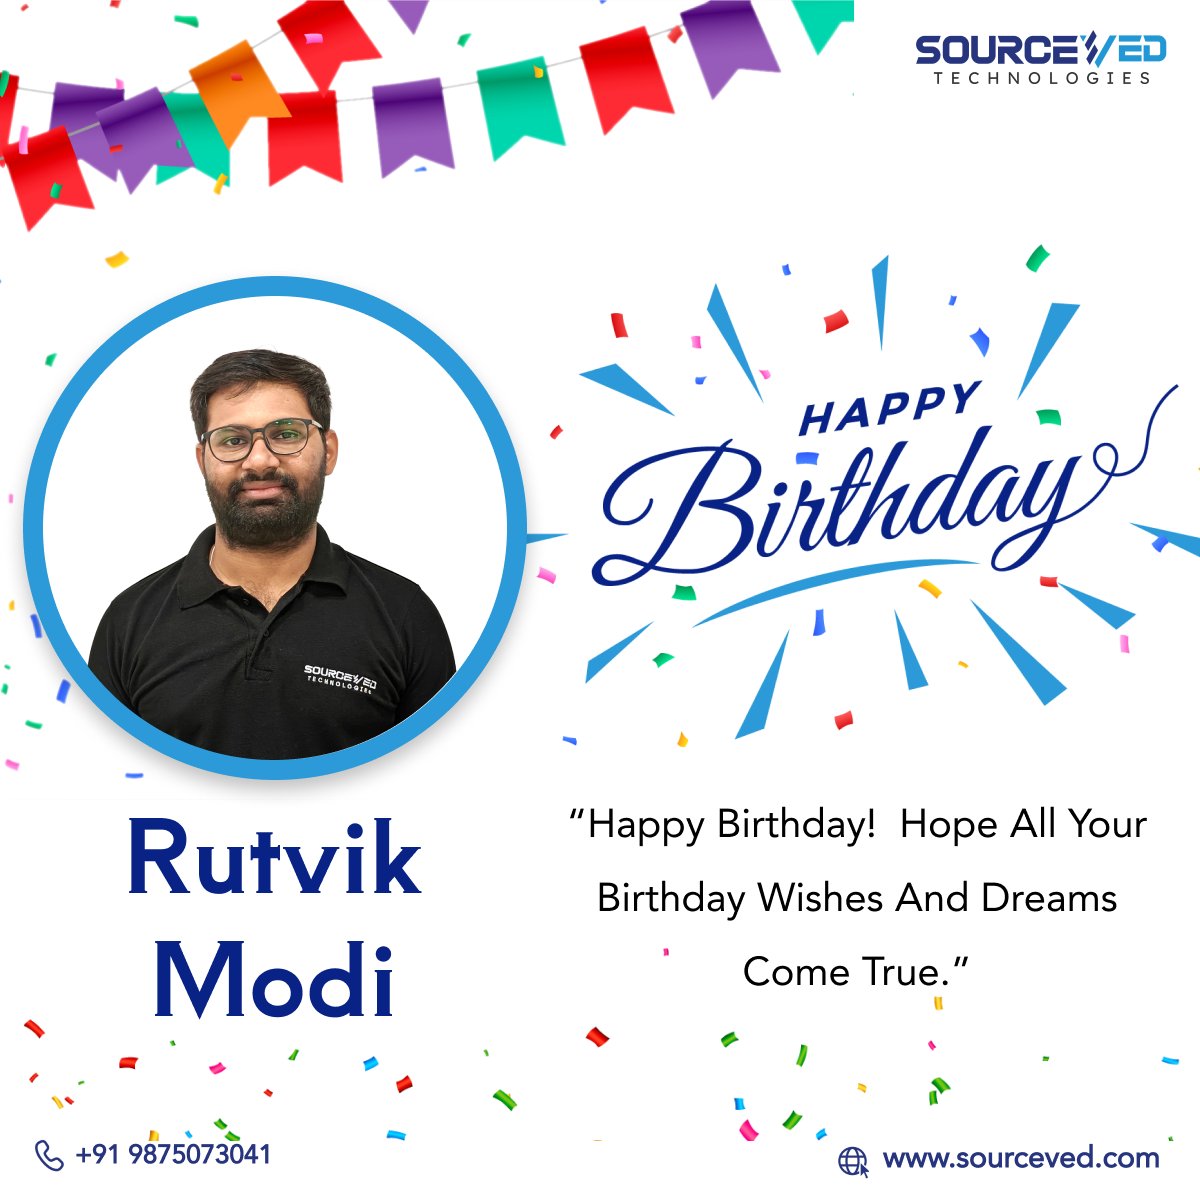 Happy birthday, Rutvik Modi!
May this special day bring you joy, laughter, and an abundance of wonderful moments.

#happybirthday #birthday #birthdaypost #birthdaycelebration #birthdaycelebration #celebration #employeebirthday #goodwishes #friday #sourceved #sourcevedtechnologies